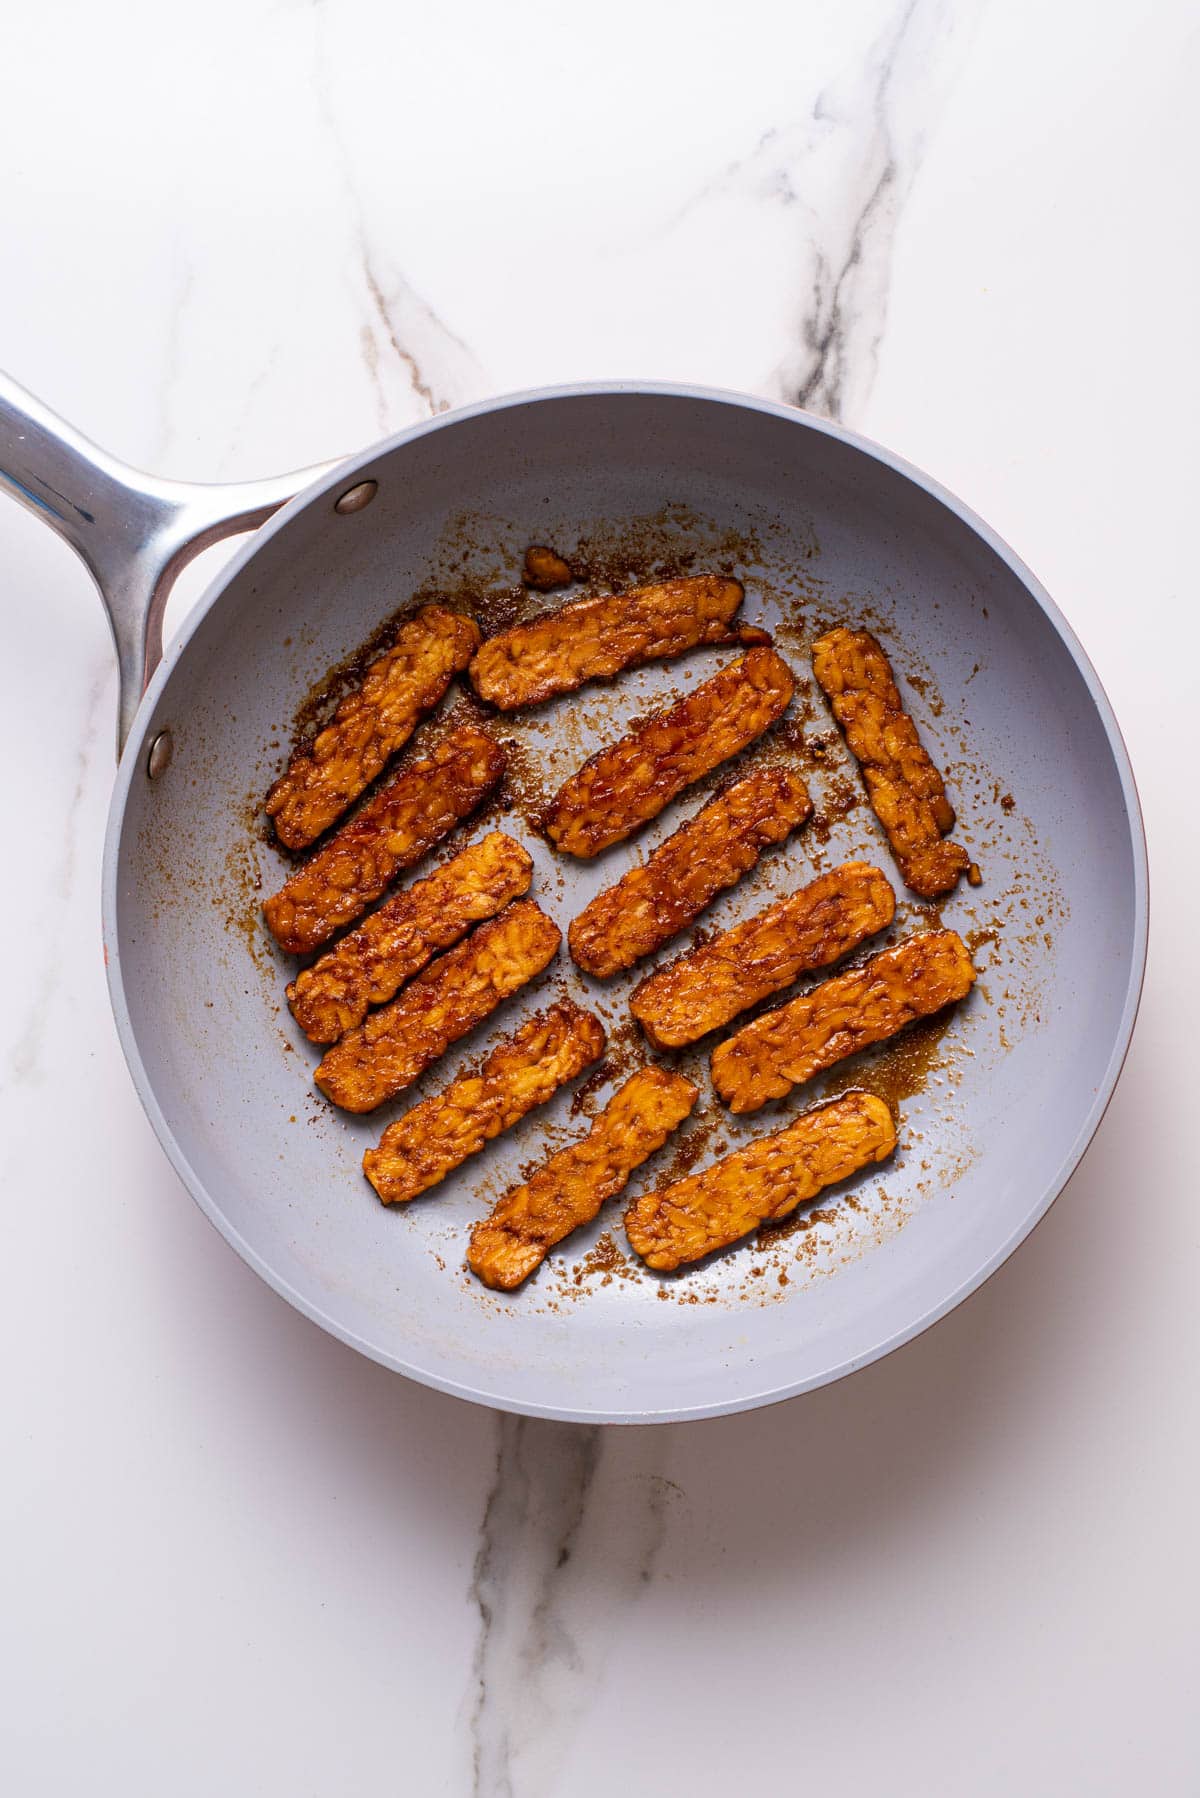 Marinated tempeh strips cooking in skillet.